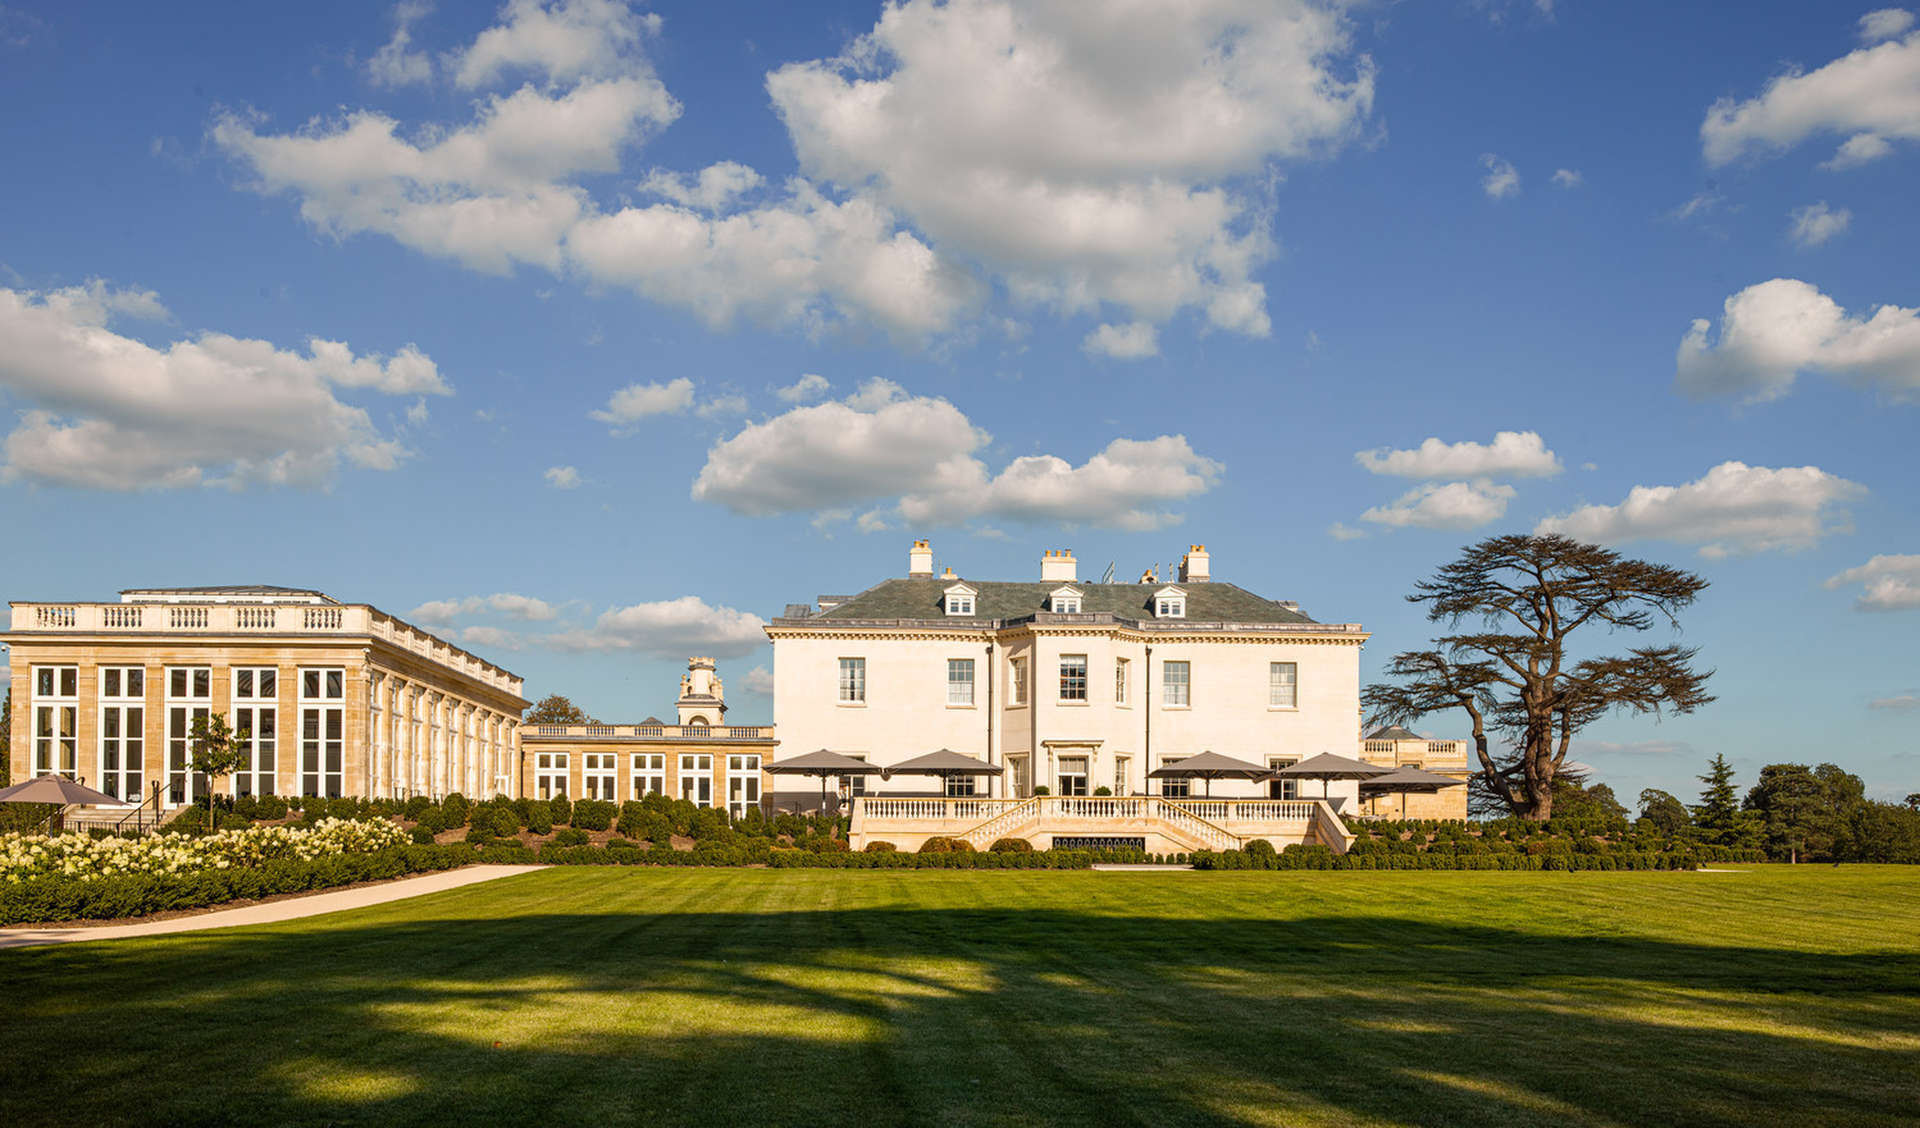 The Langley, a Luxury Collection Hotel in Buckinghamshire